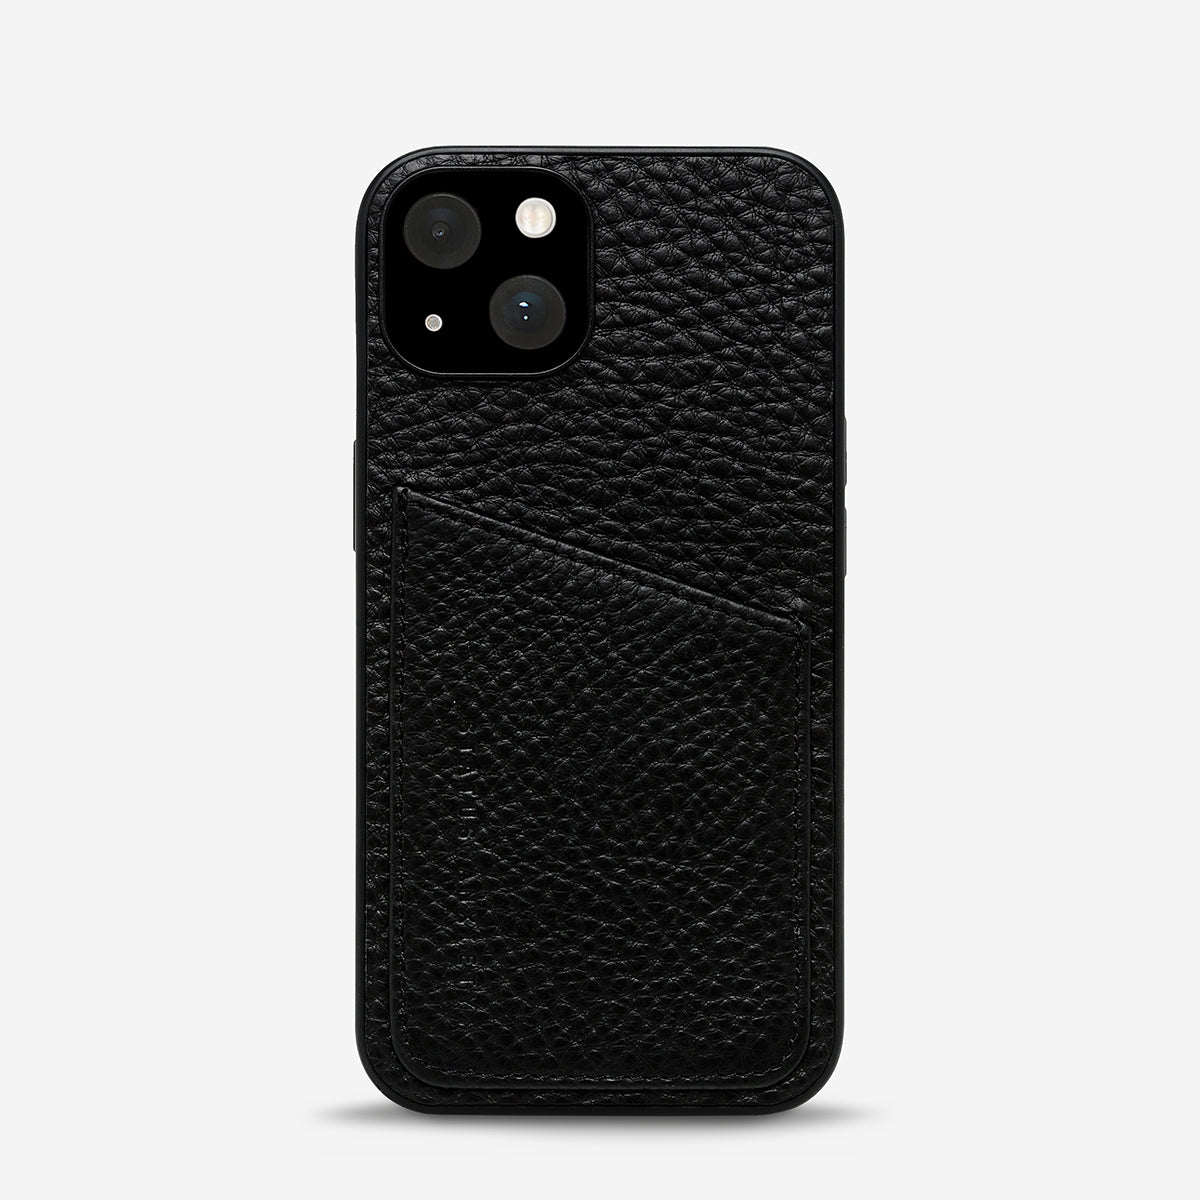 Who's Who Phone Case - Black